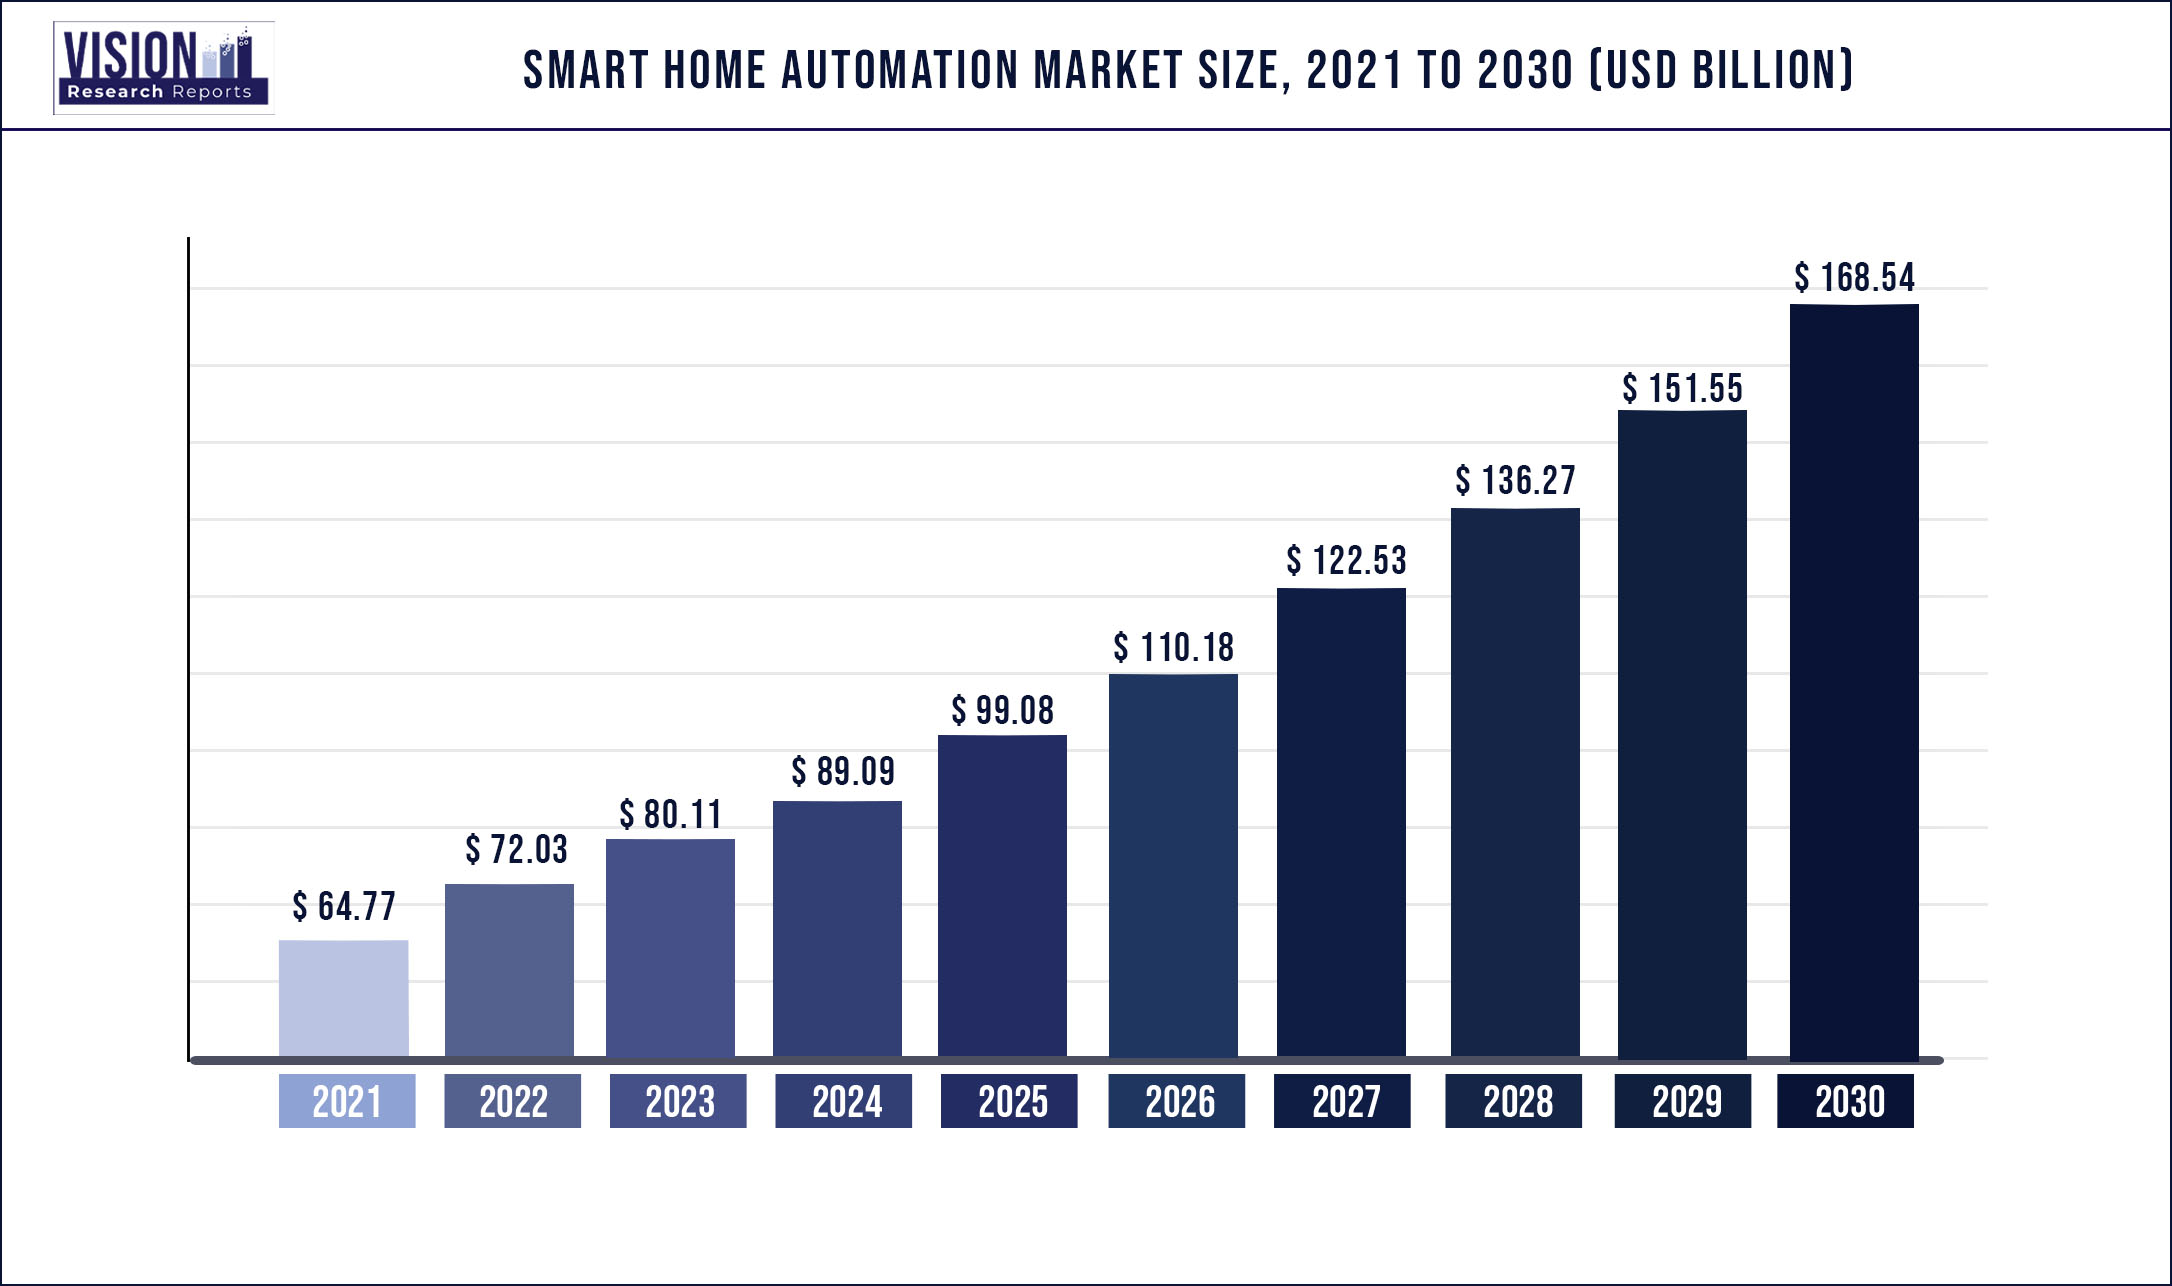 Smart Home Automation Market Size 2021 to 2030